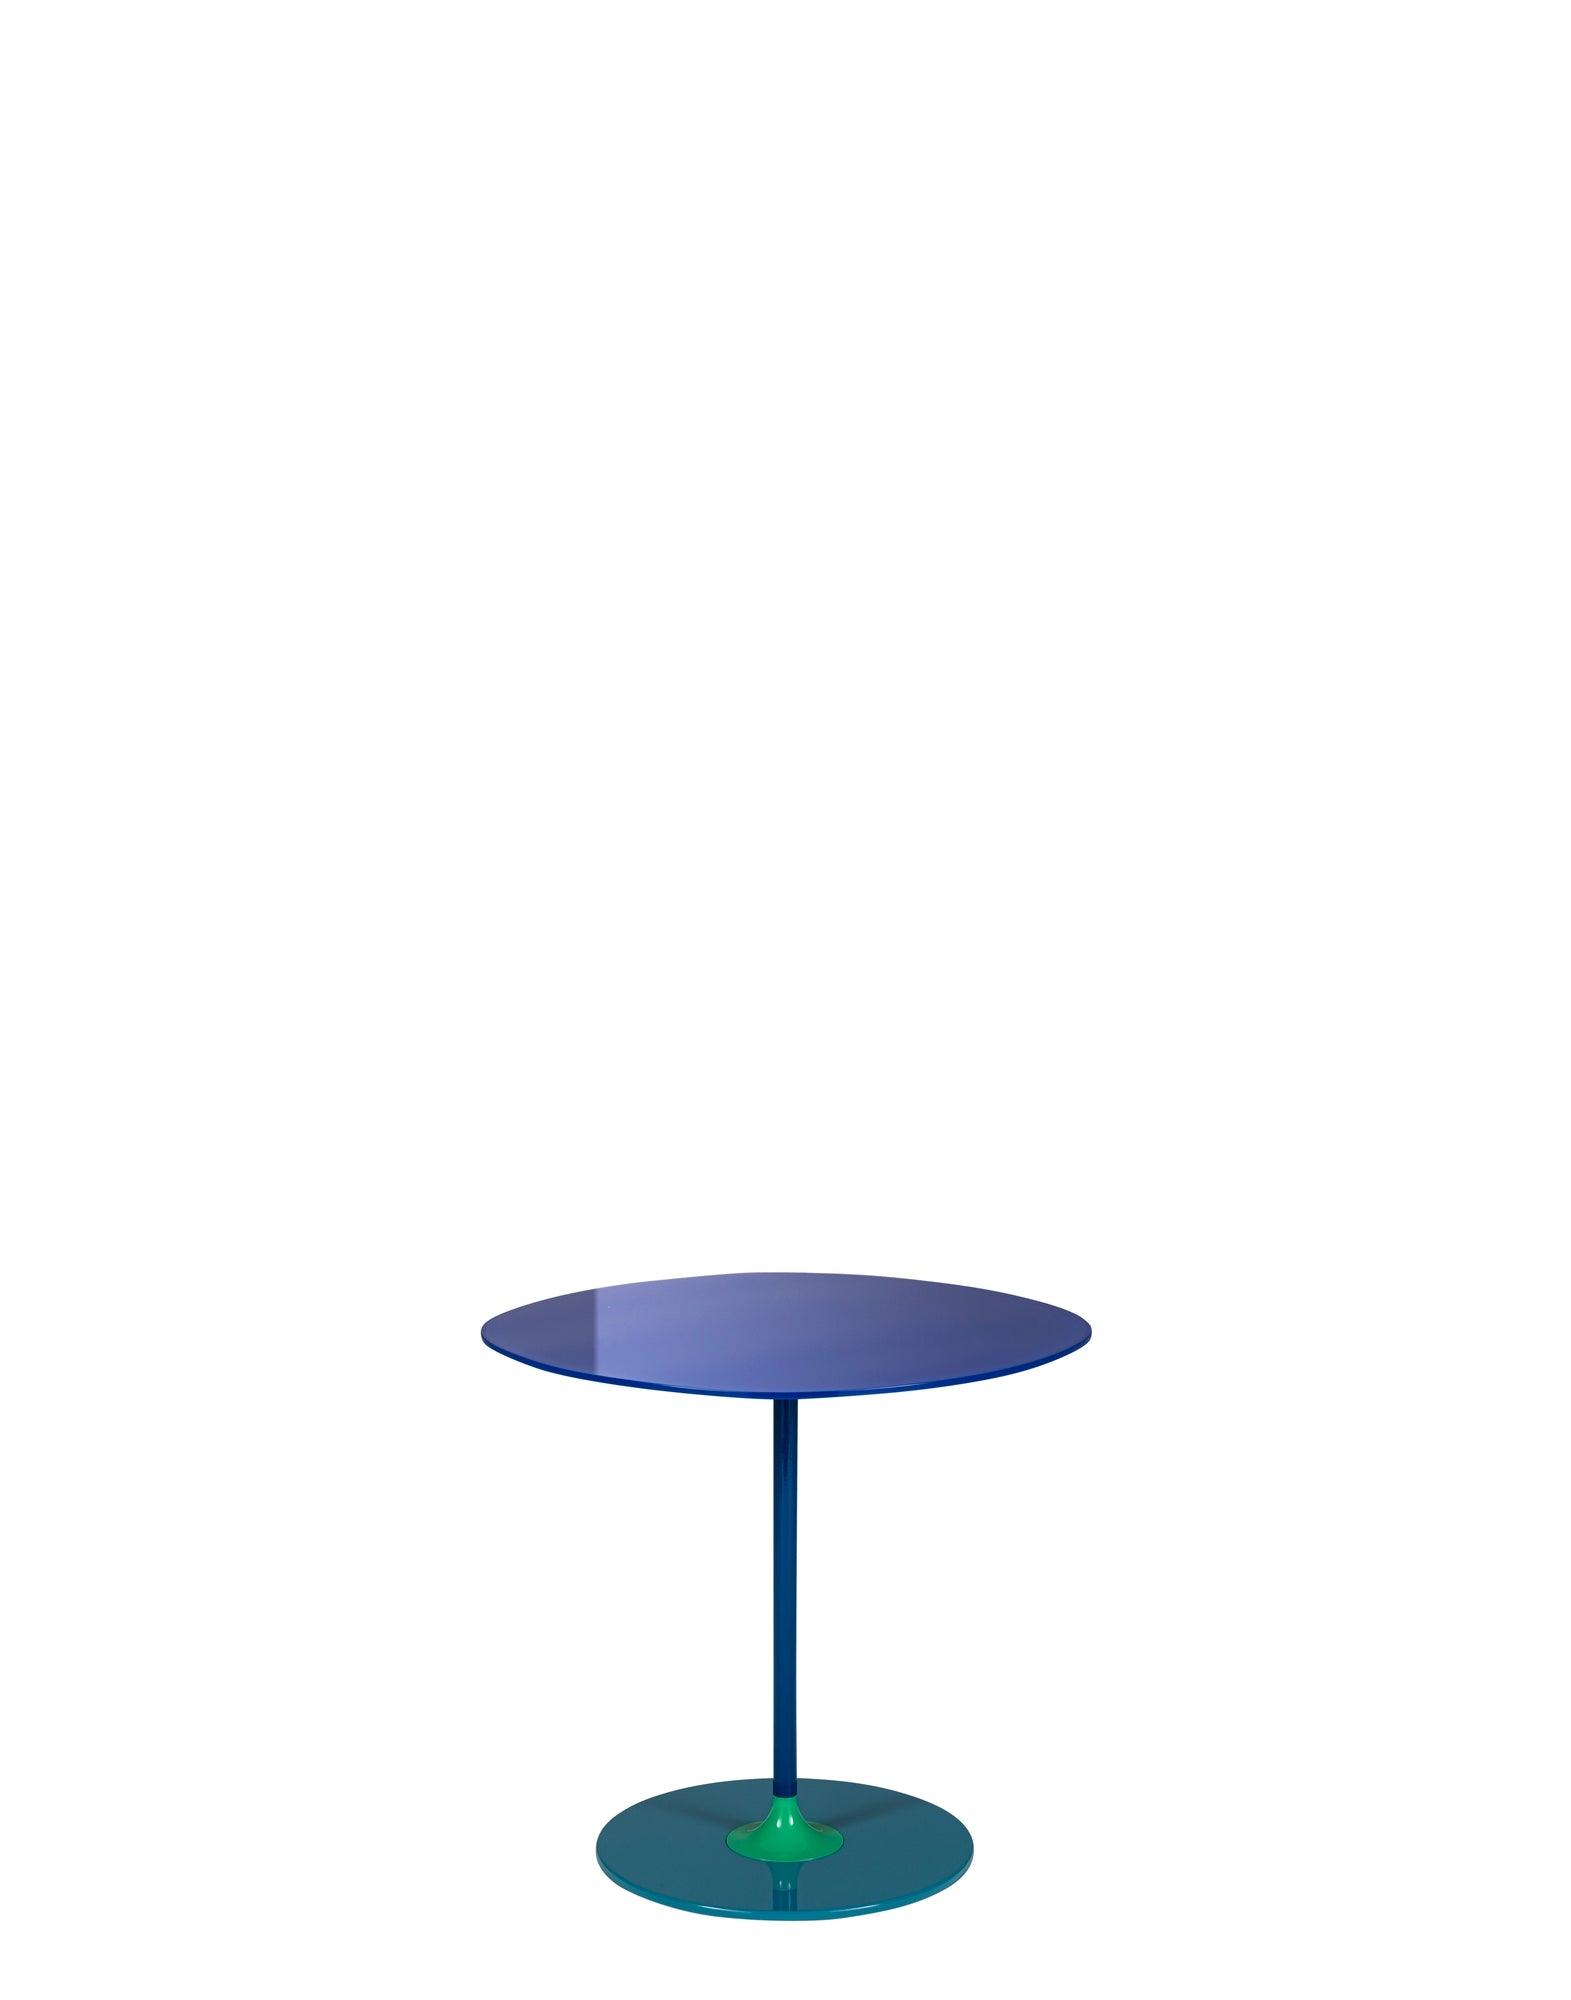 Thierry Medium Table - Curated - Furniture - Kartell